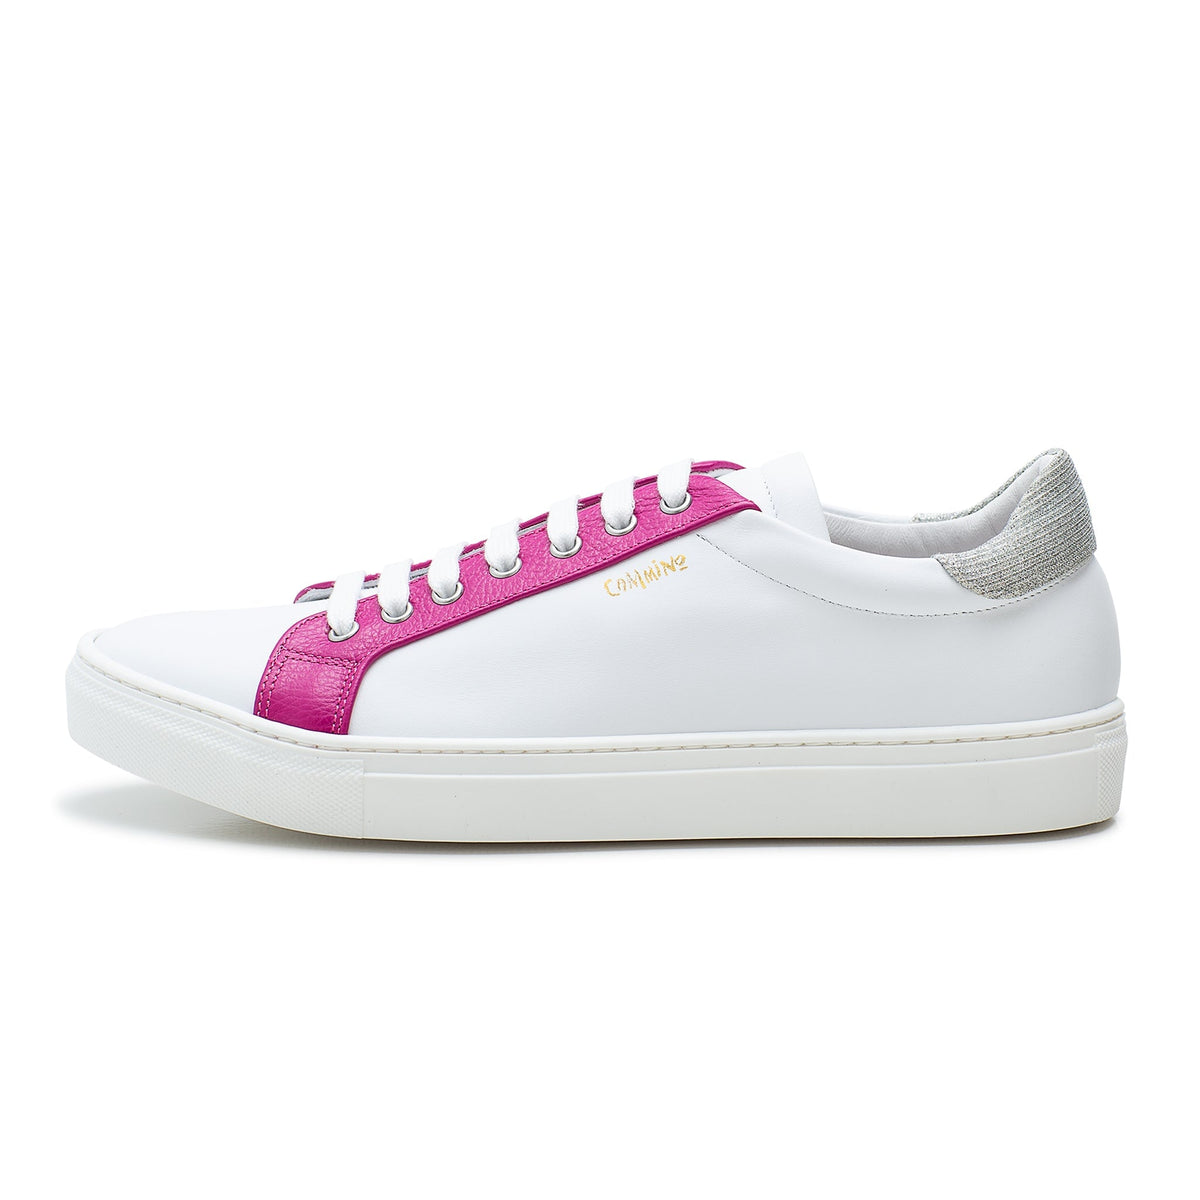 Orvieto - Pink and Silver Sparkles Sneaker Sneakers Cammino Shoes 